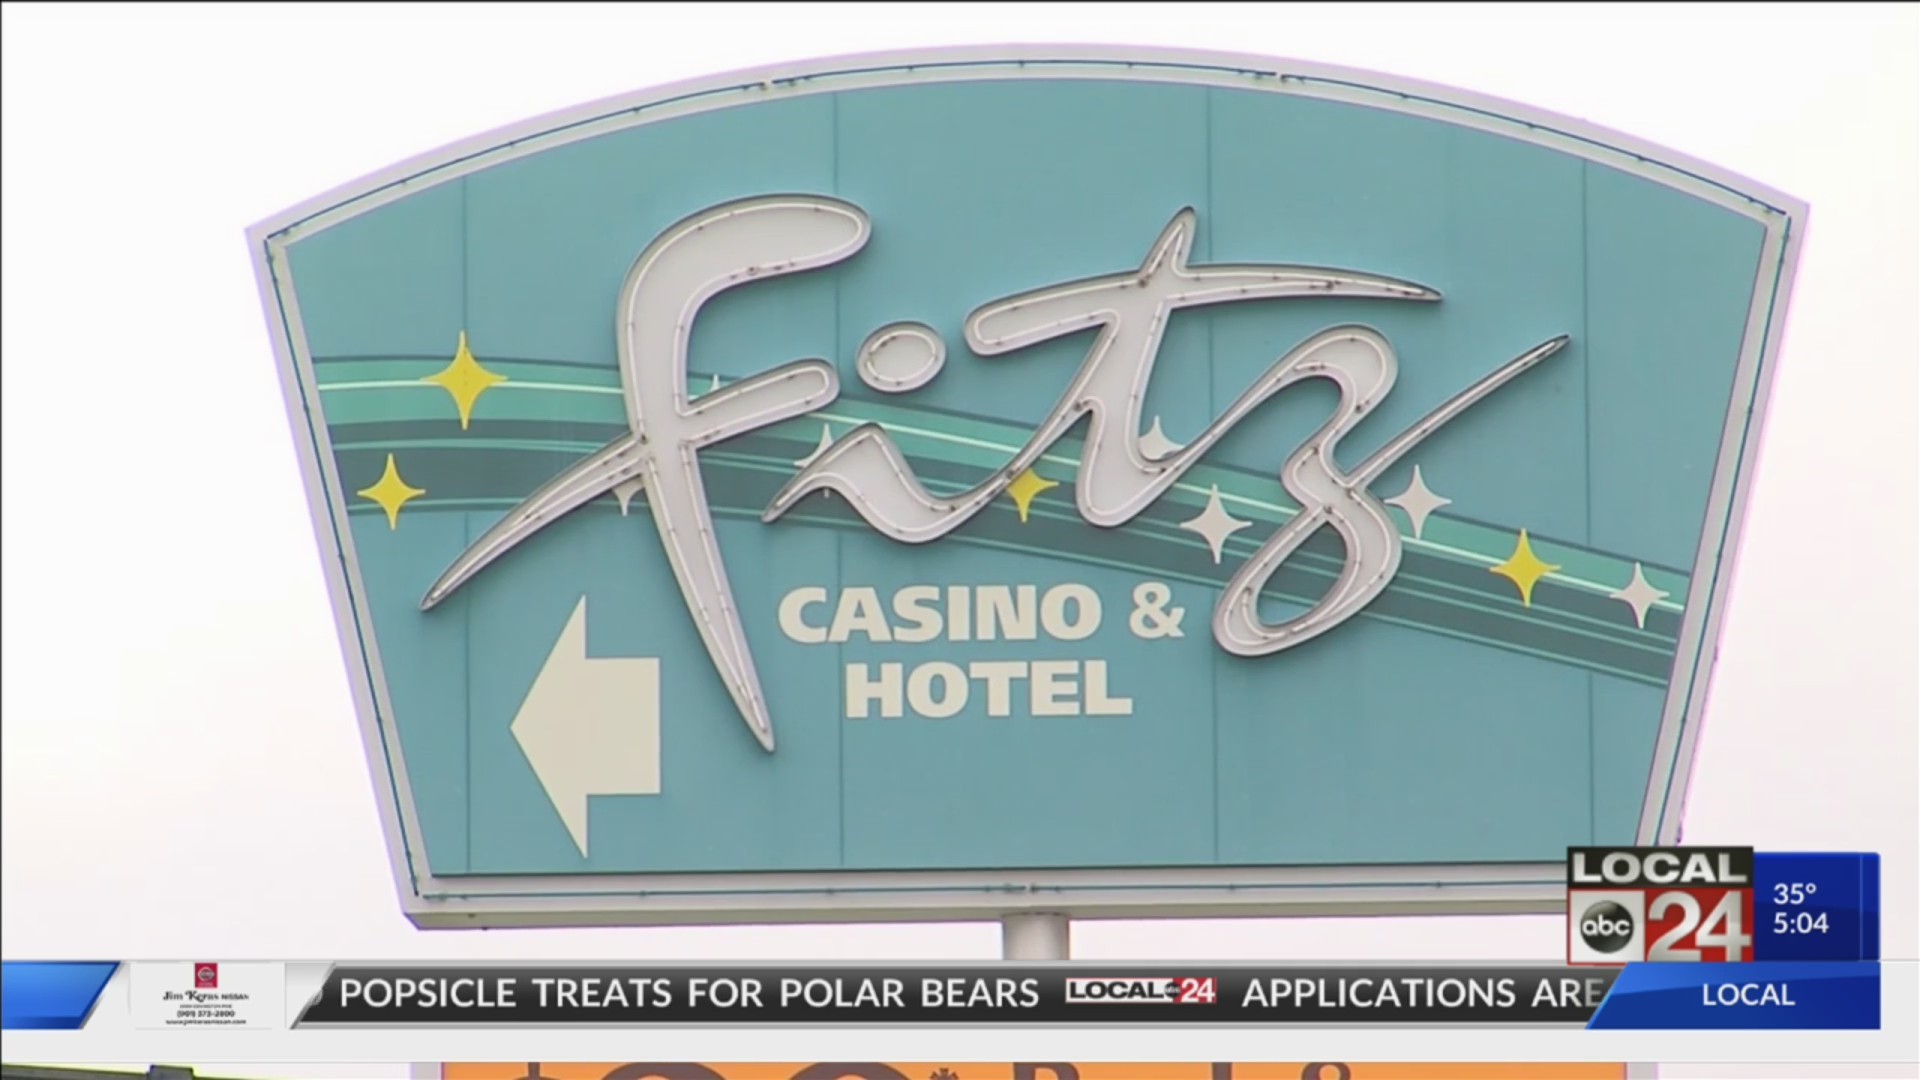 Fitz Casino & Hotel Temporarily Closed Due To Flooded Rivers